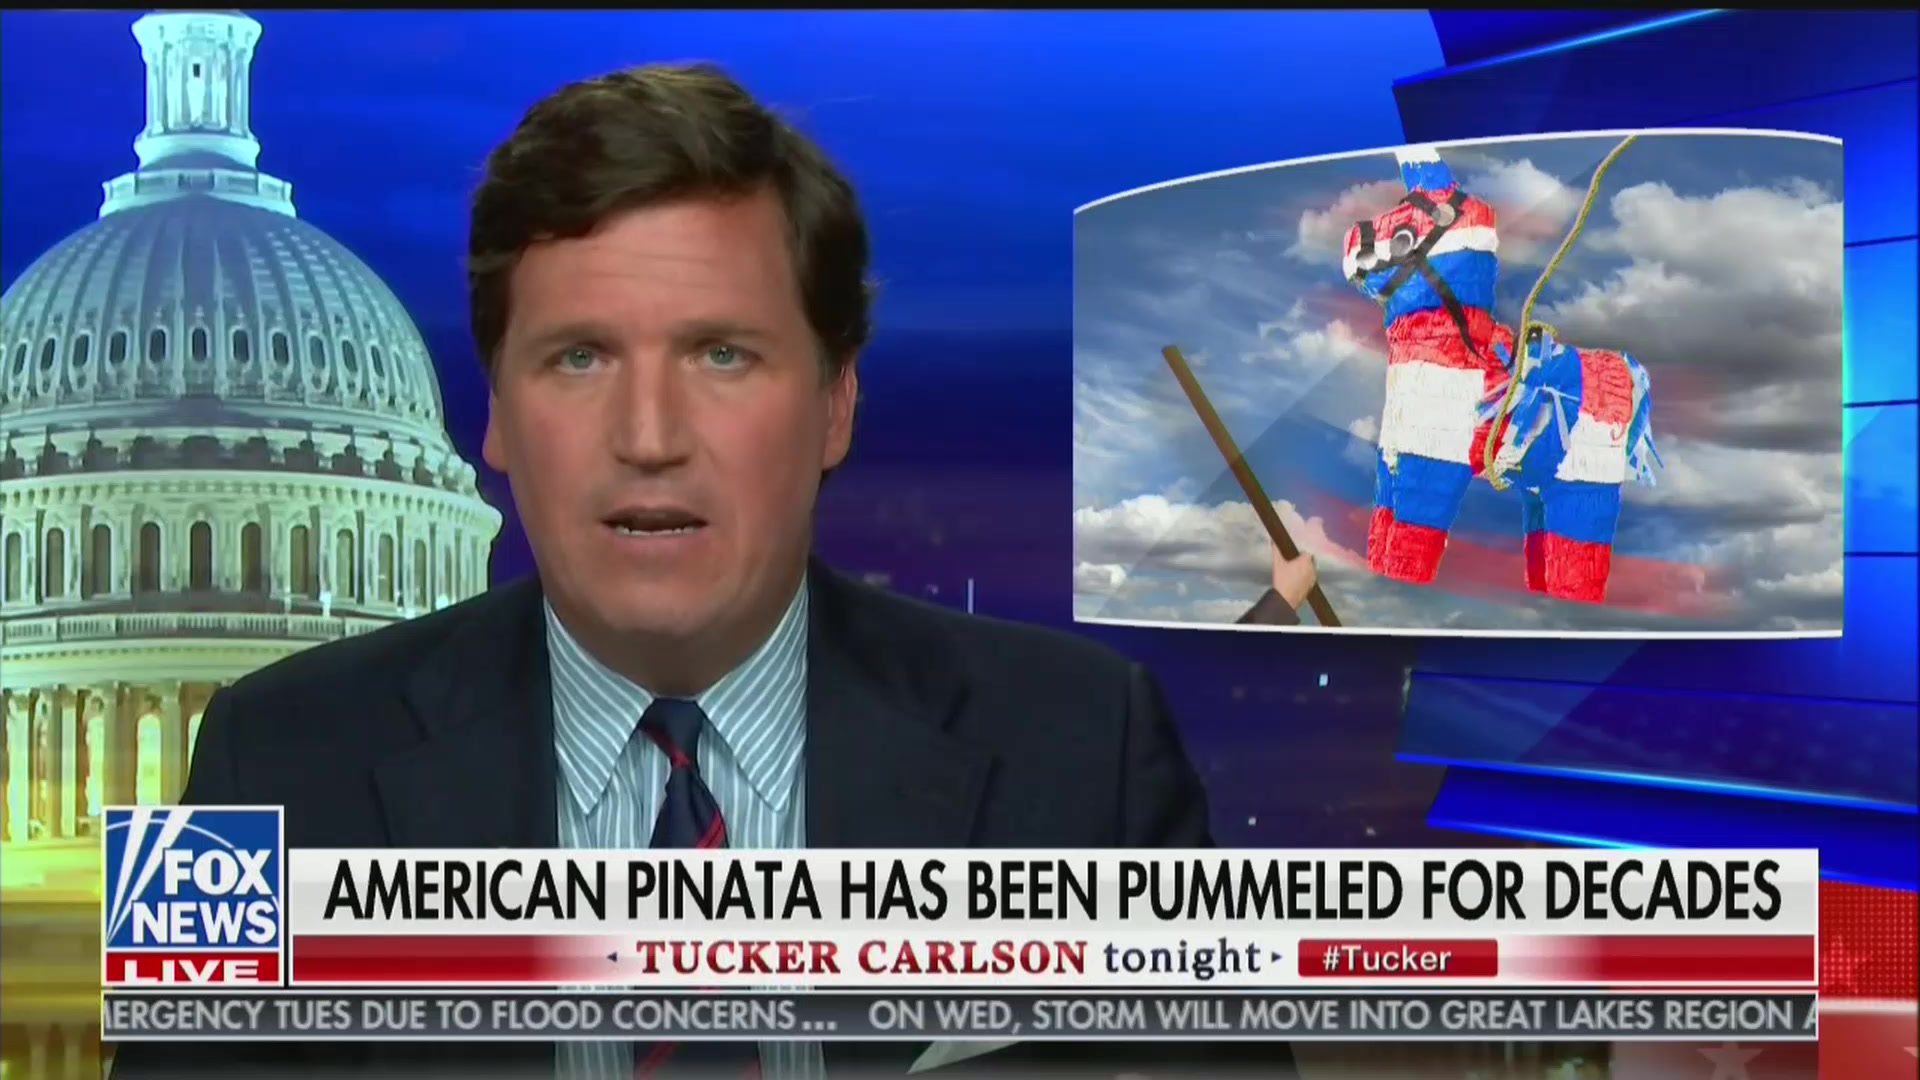 Tucker Carlson: Immigrants Have ‘Plundered’ Our Wealth and ‘Are Coming’ For More